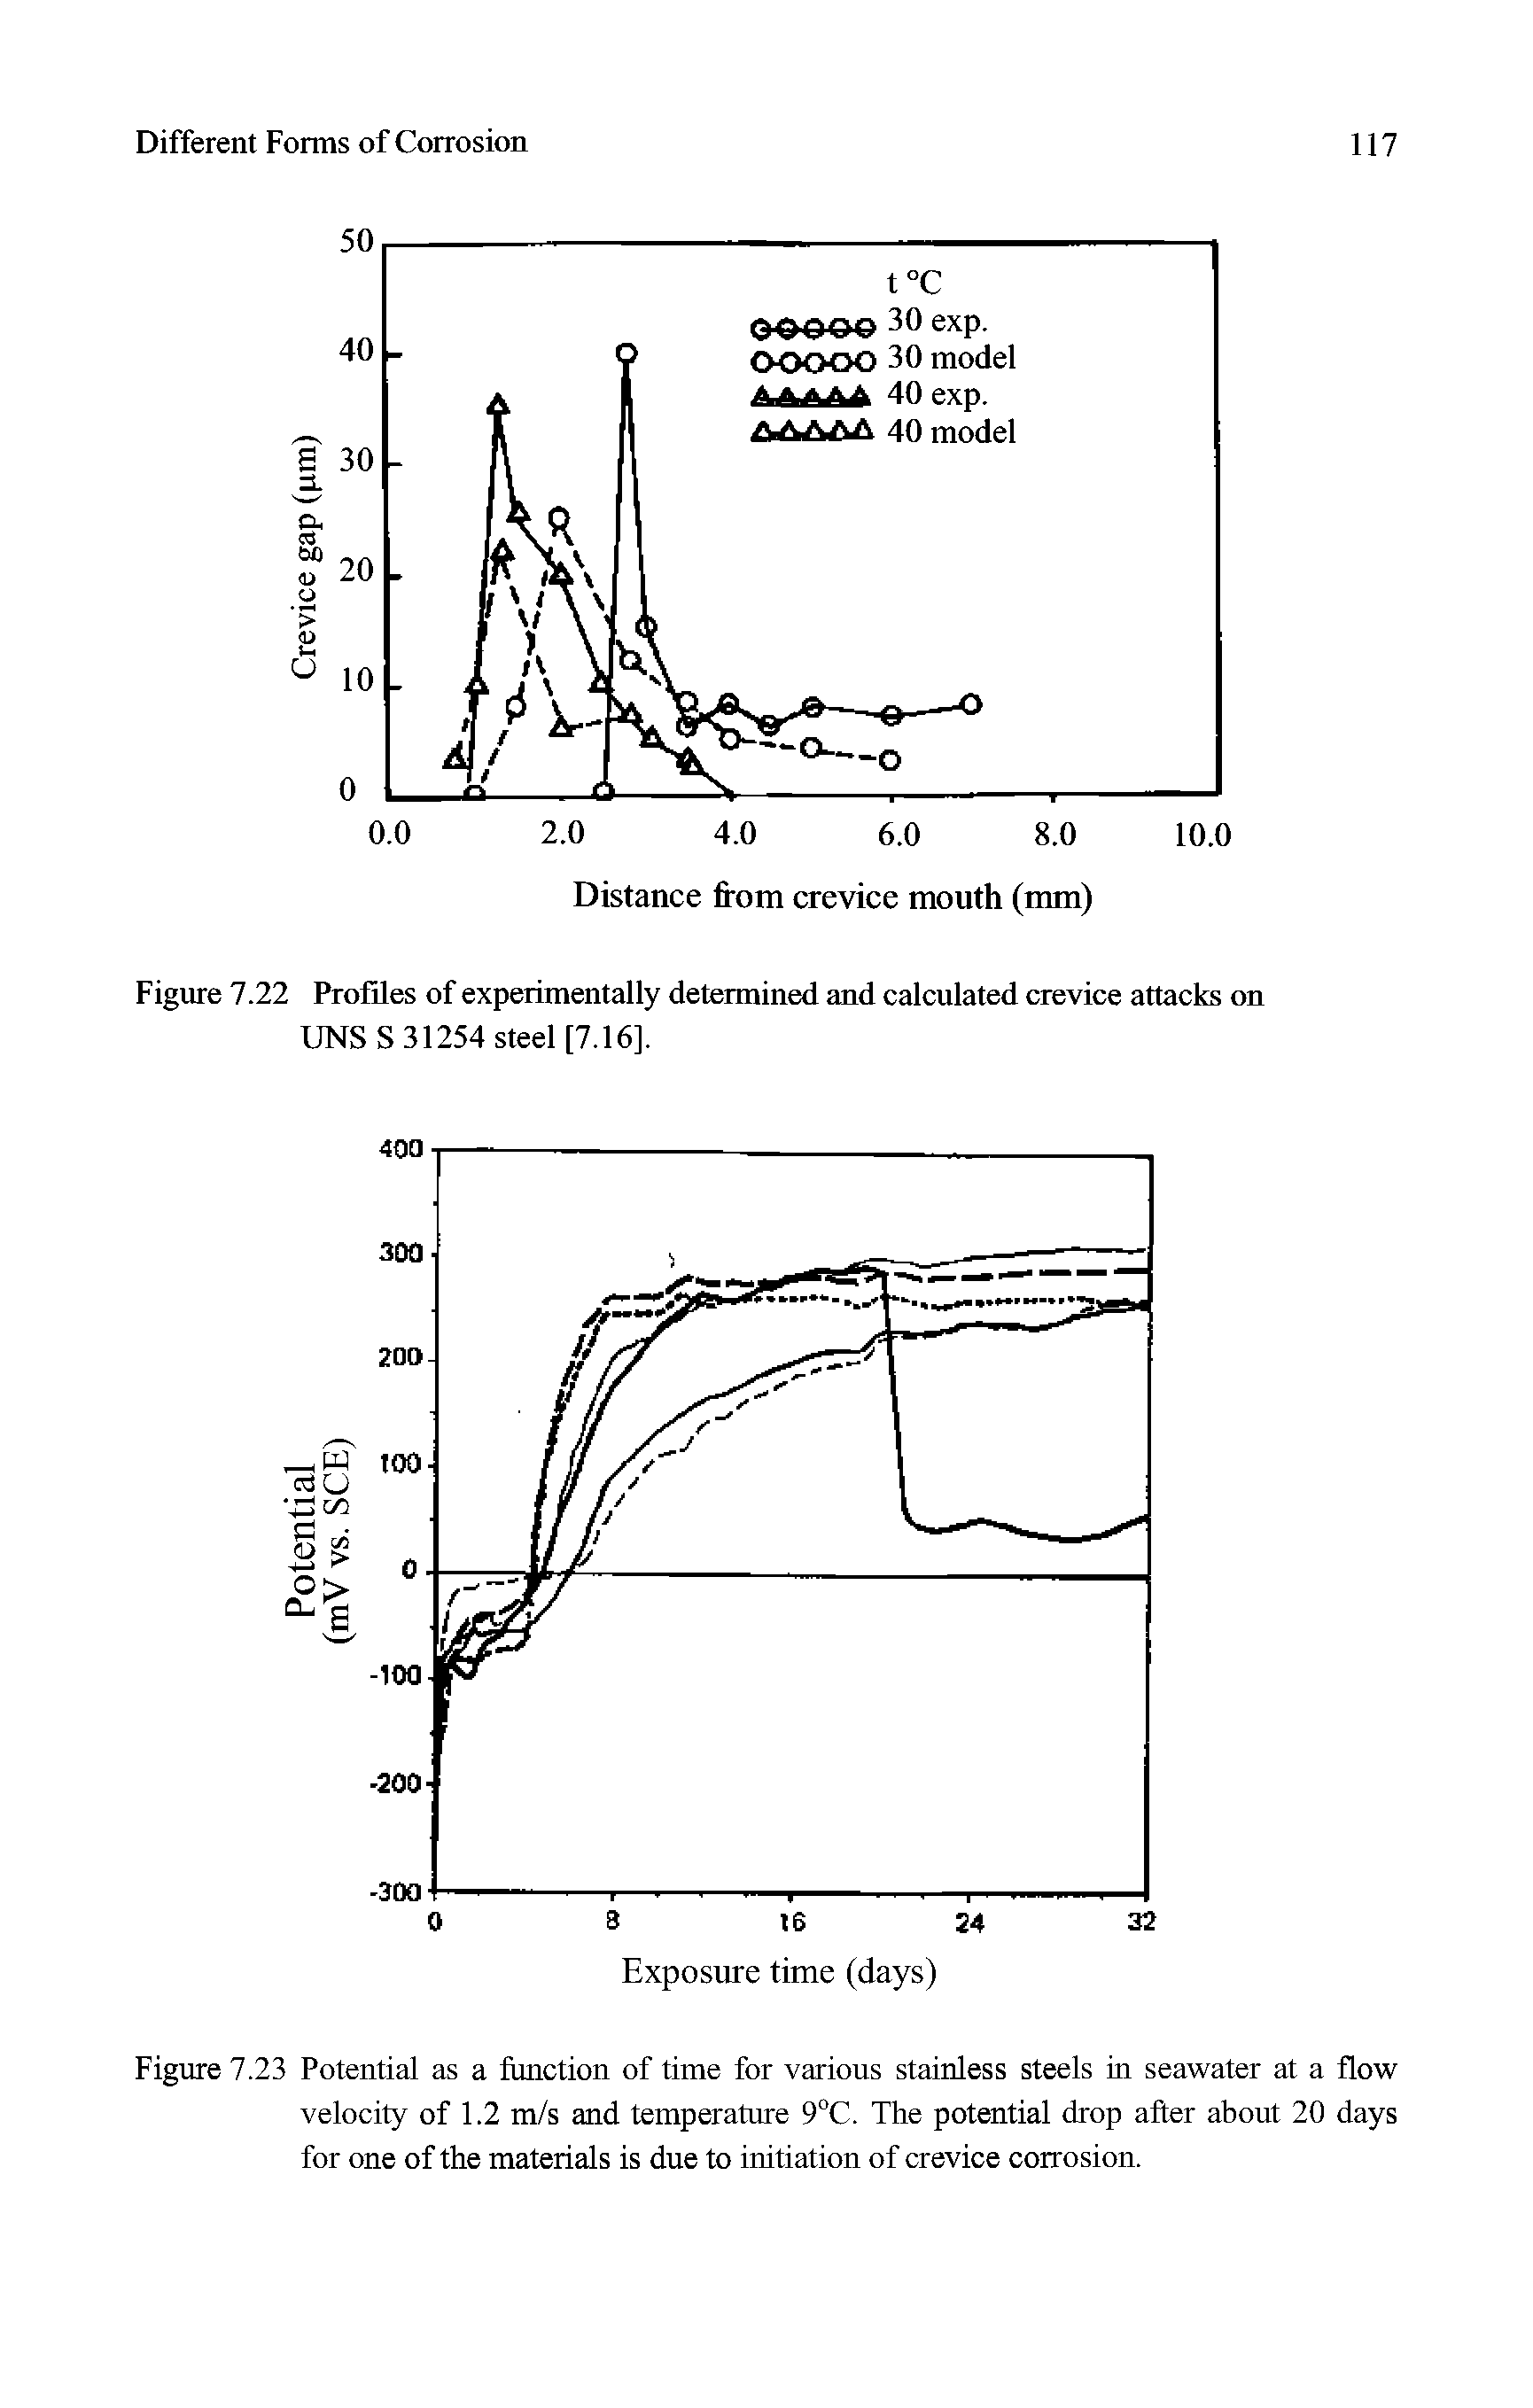 Figure 7.23 Potential as a function of time for various stainless steels in seawater at a flow velocity of 1.2 m/s and temperature 9 C. The potential drop after about 20 days for one of the materials is due to initiation of crevice corrosion.